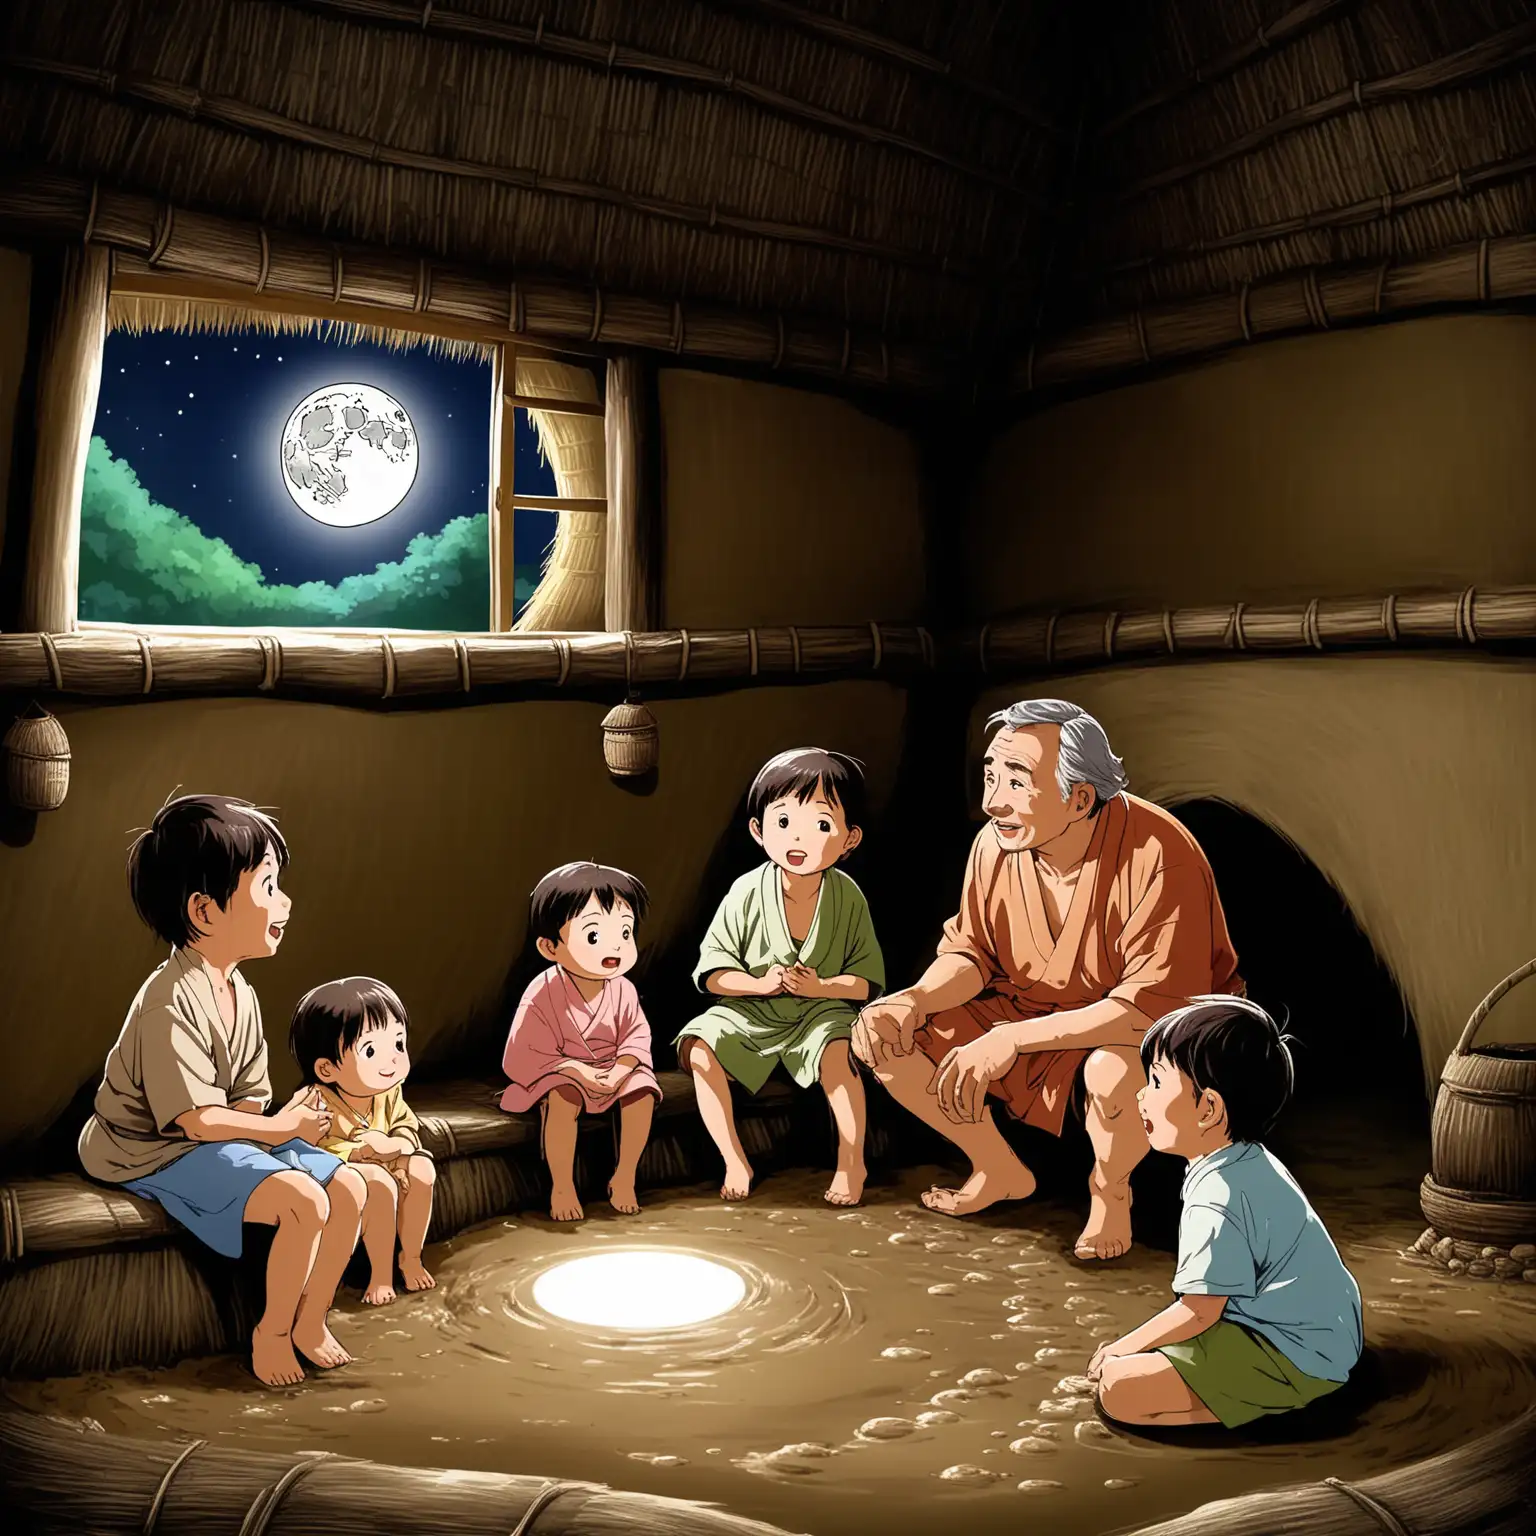 In a mud hut with thatched roof, there is a middle-aged man telling stories to three little kids, while the clean white moon can be seen outside the window